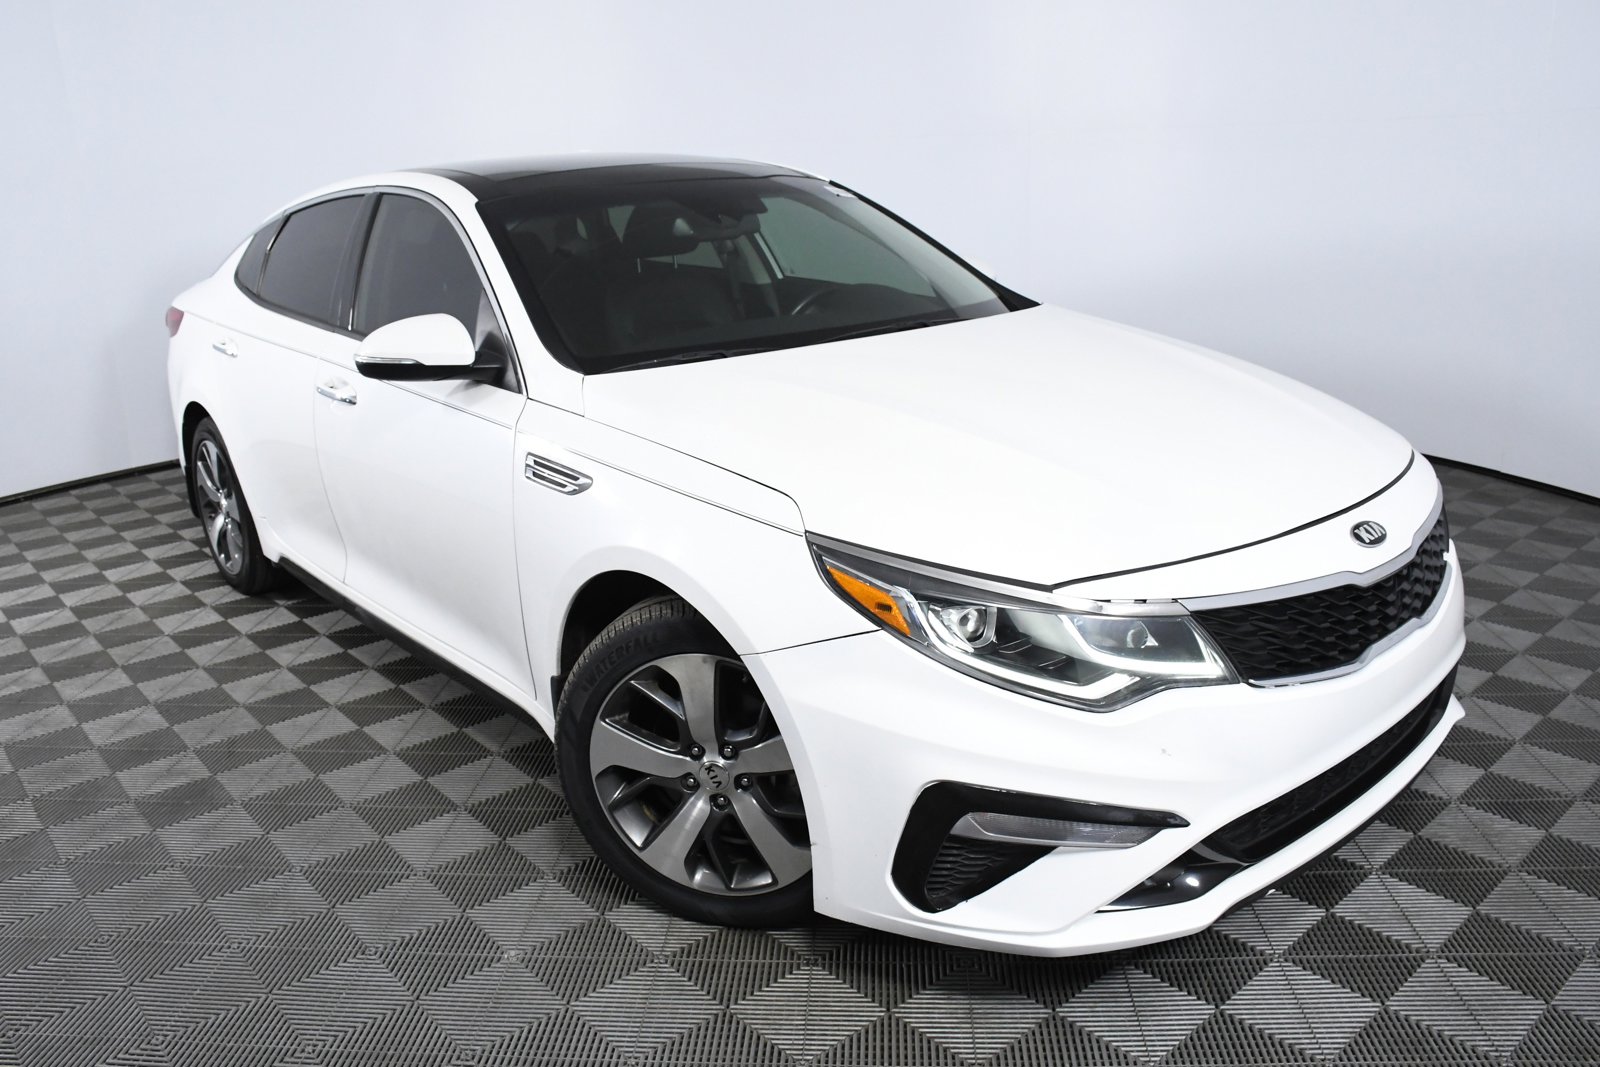 Pre-Owned 2019 Kia Optima S 4dr Car in Palmetto Bay #G370917 | HGreg Nissan  Kendall